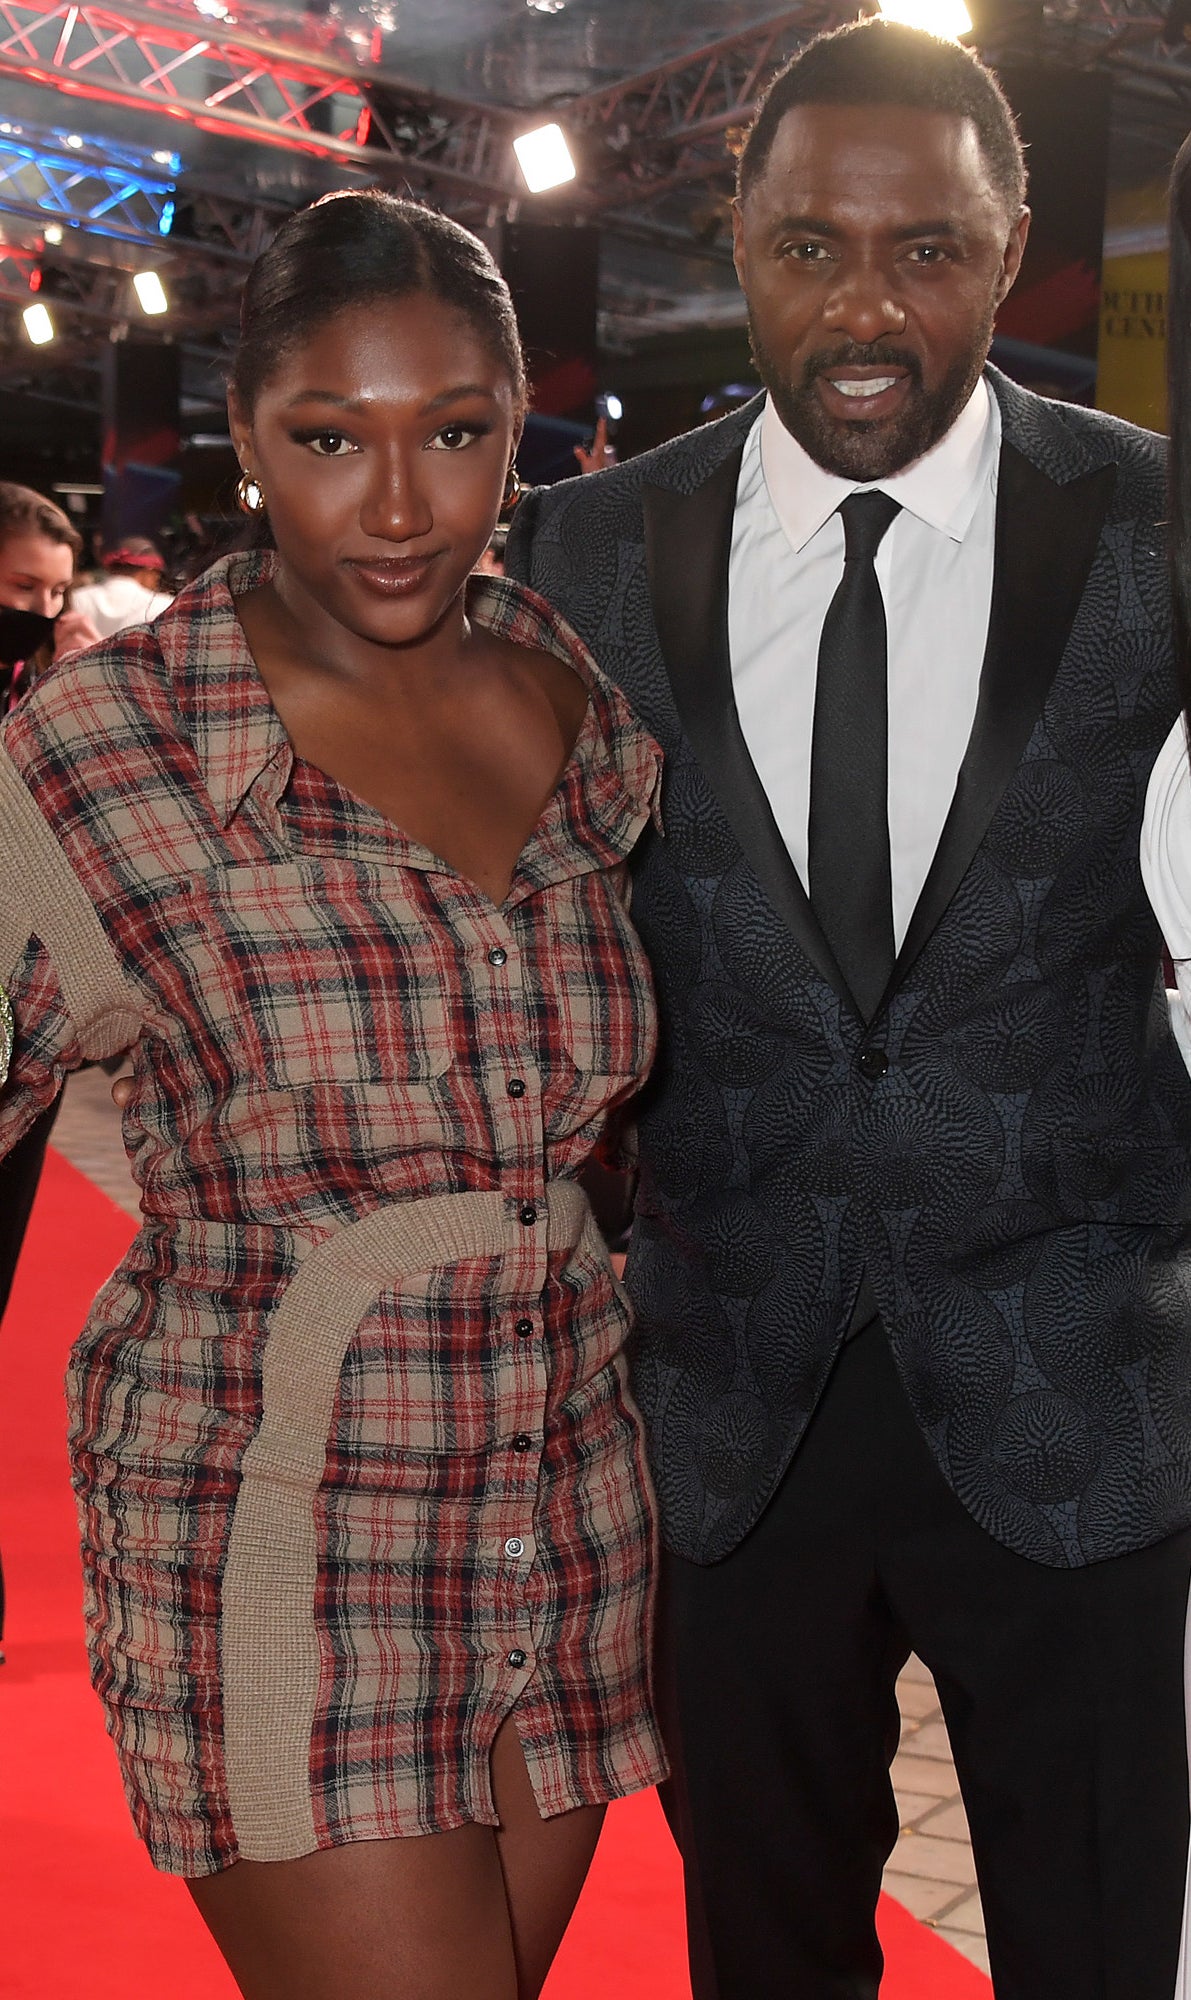 Isan and Idris on the red carpet